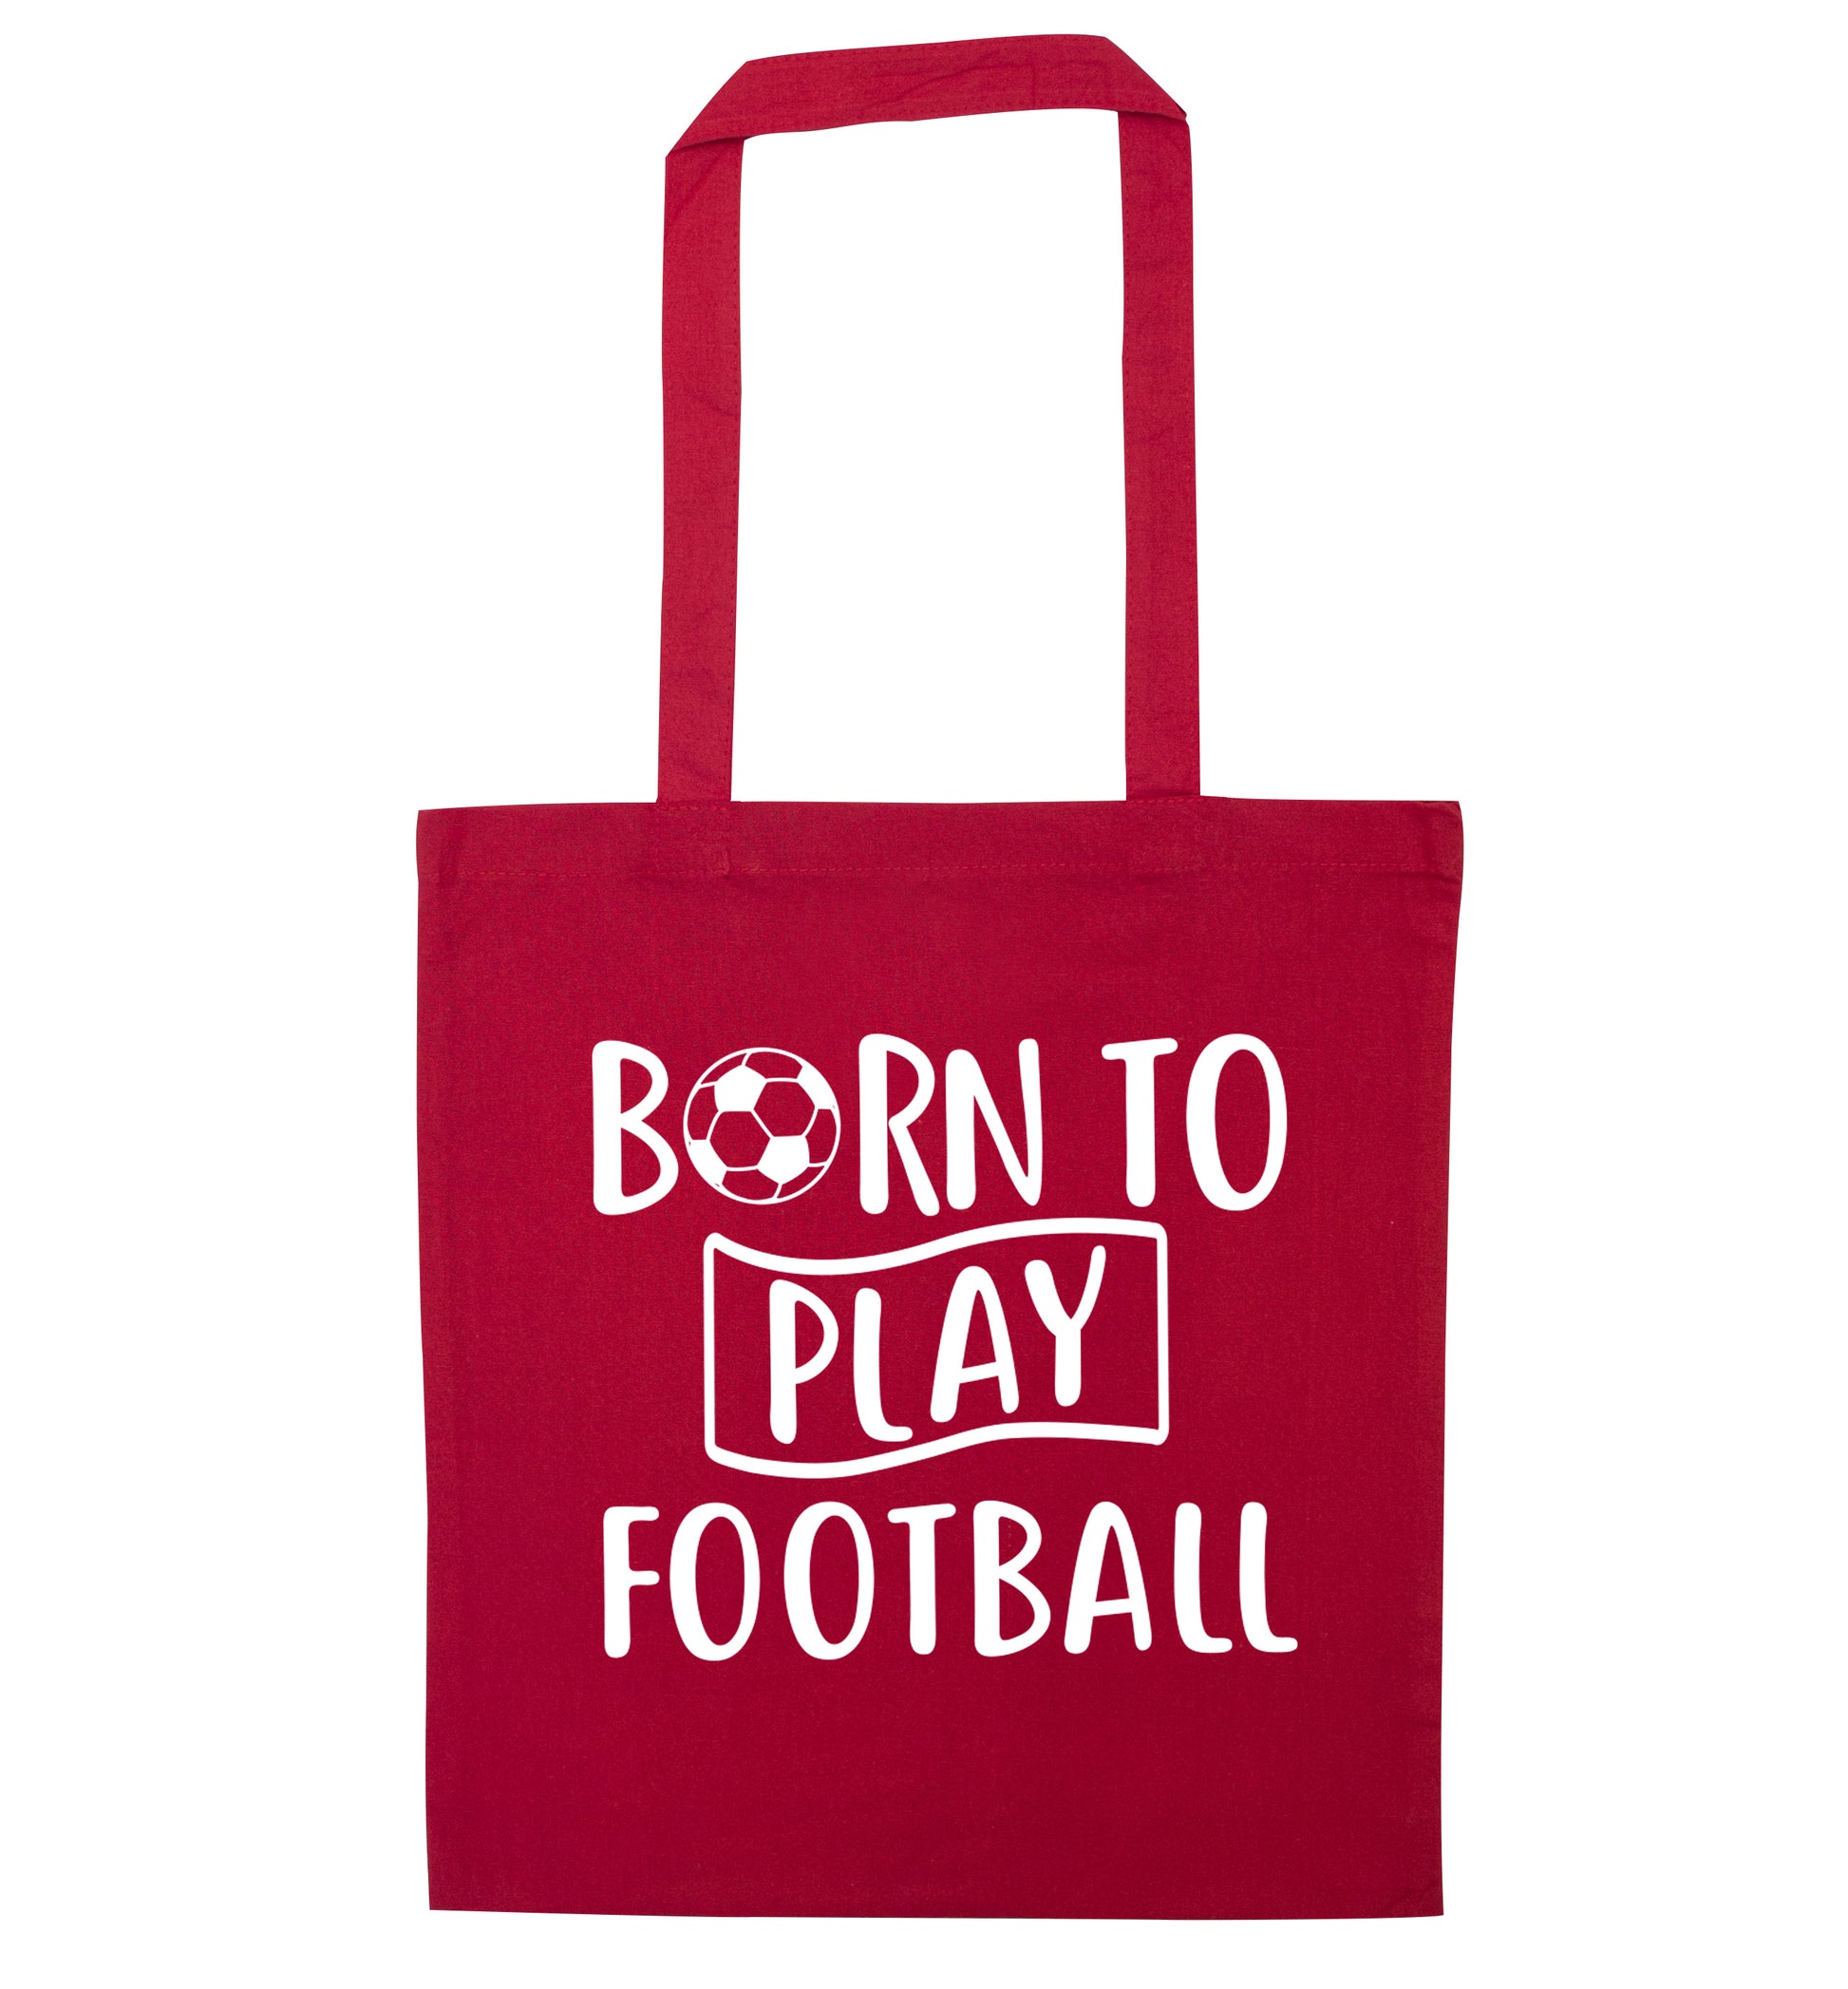 Born to play football red tote bag